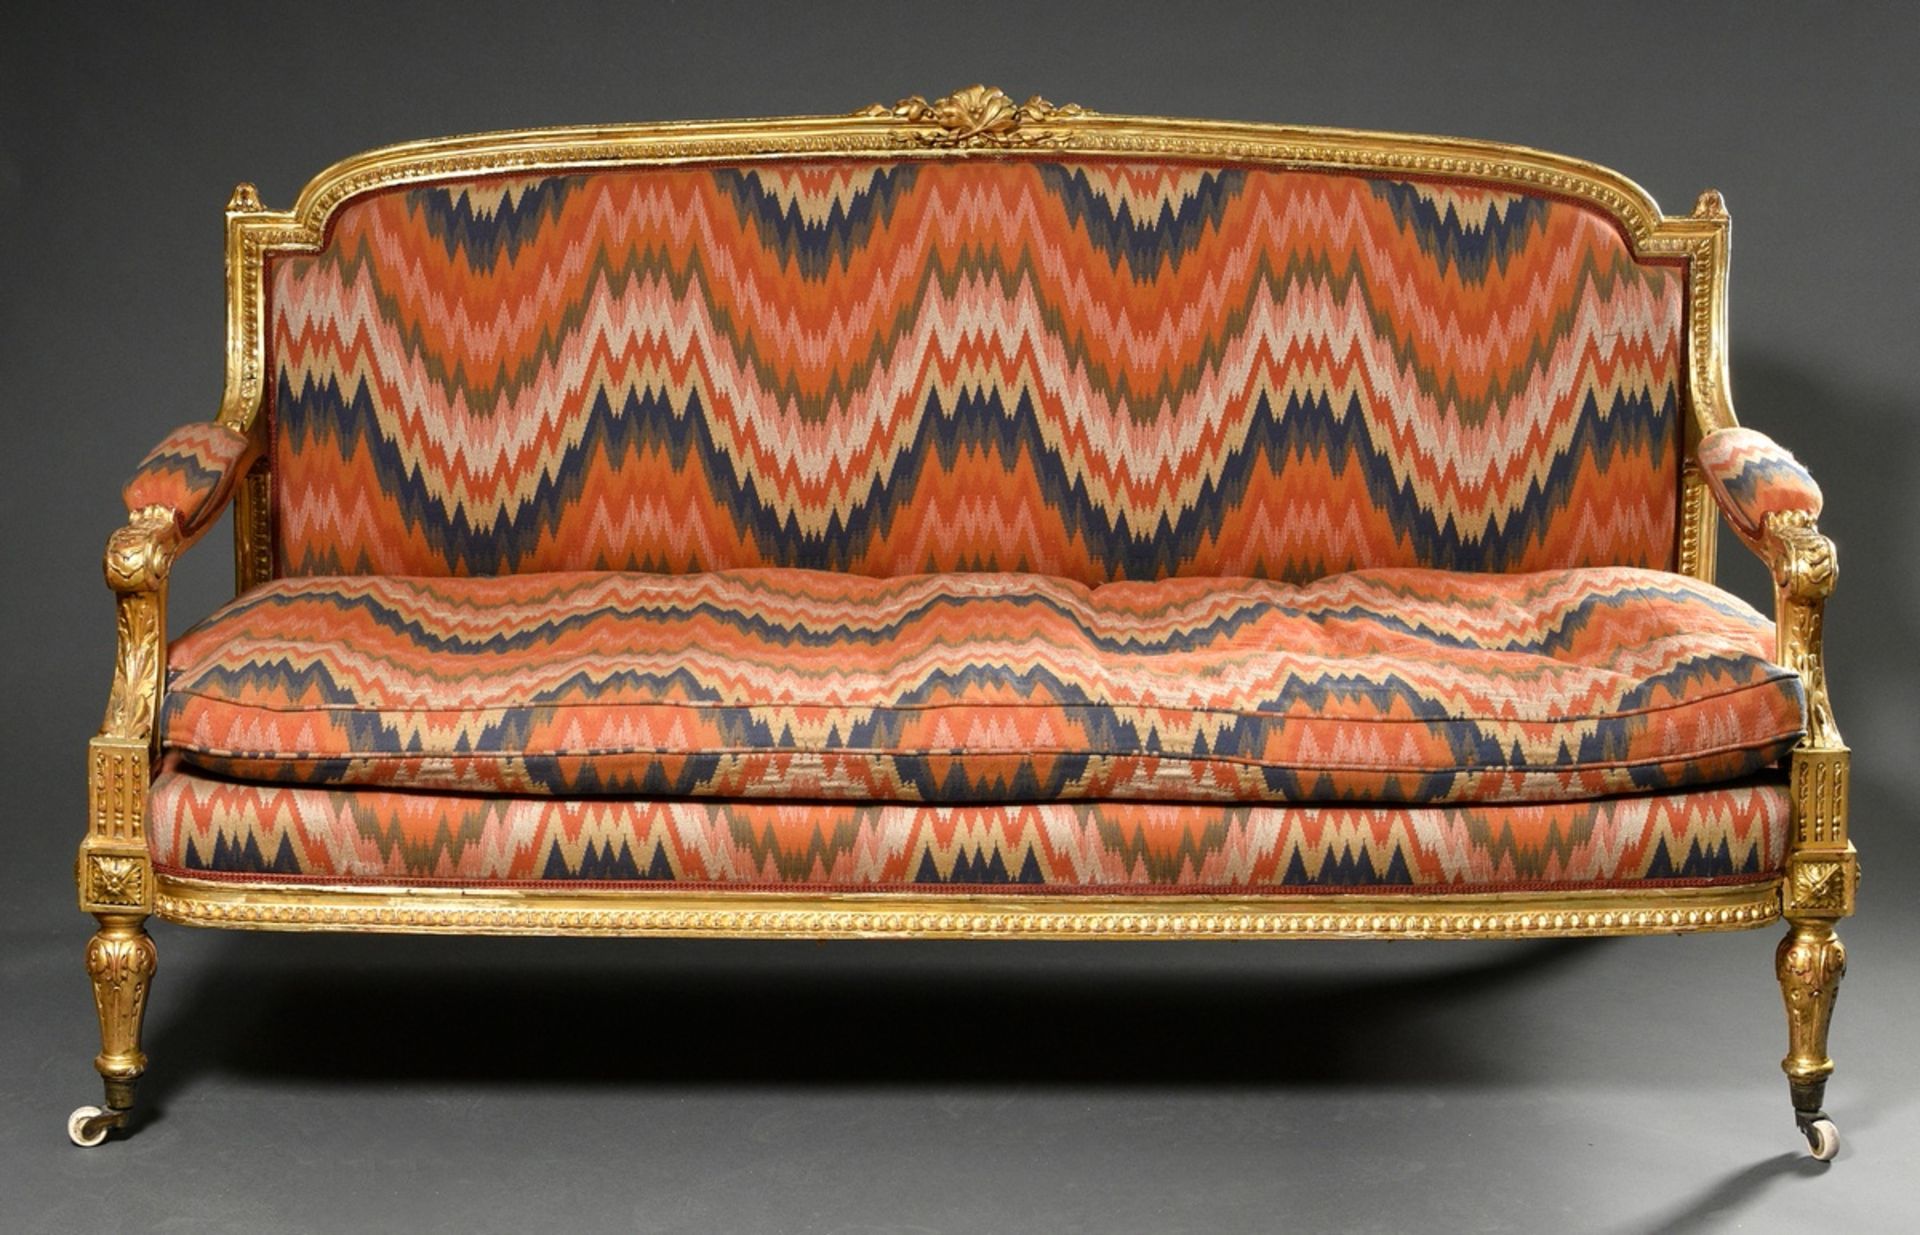 Louis XVI style sofa with leaf-gilded carved frame and opulent upholstery fabric in ikat look, arou